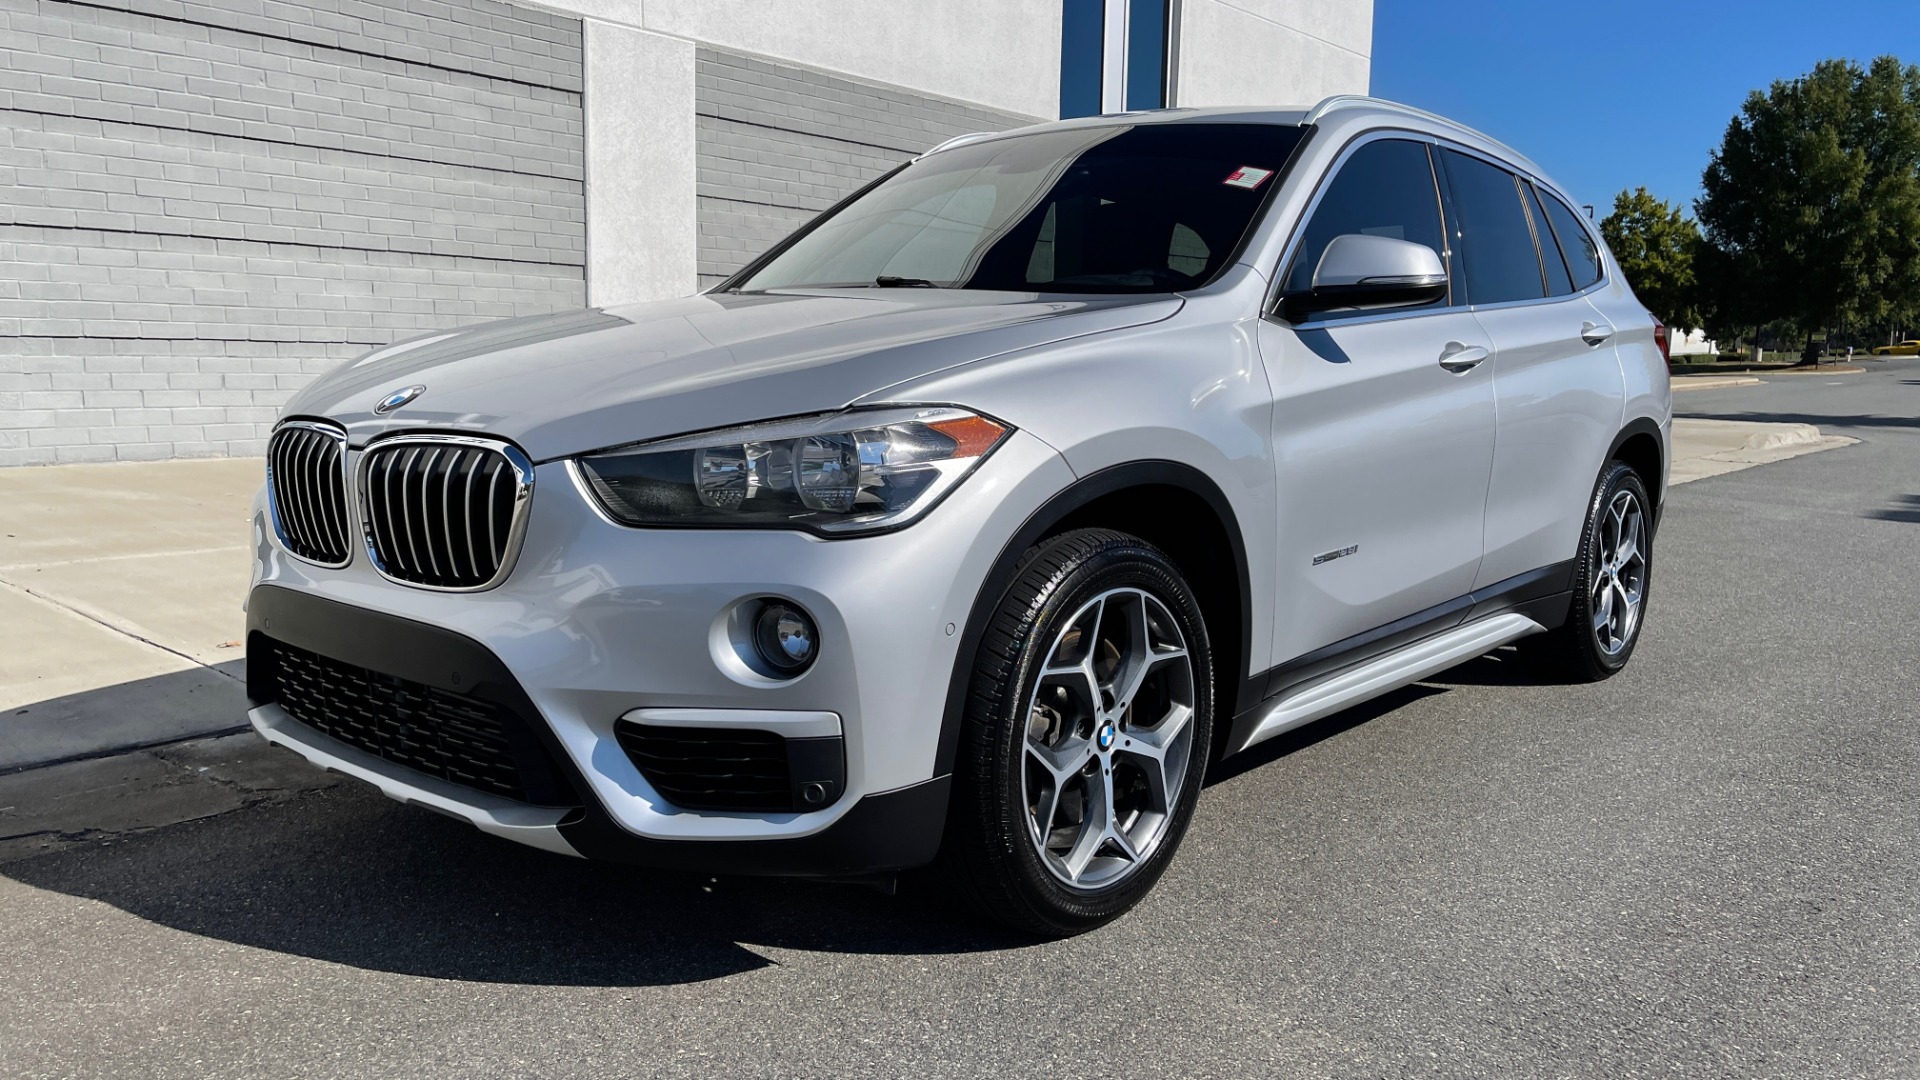 Used 2017 BMW X1 SDRIVE28I 2.0L / DRVR ASST / PARK ASST / PANO-ROOF / REARVIEW for sale Sold at Formula Imports in Charlotte NC 28227 3